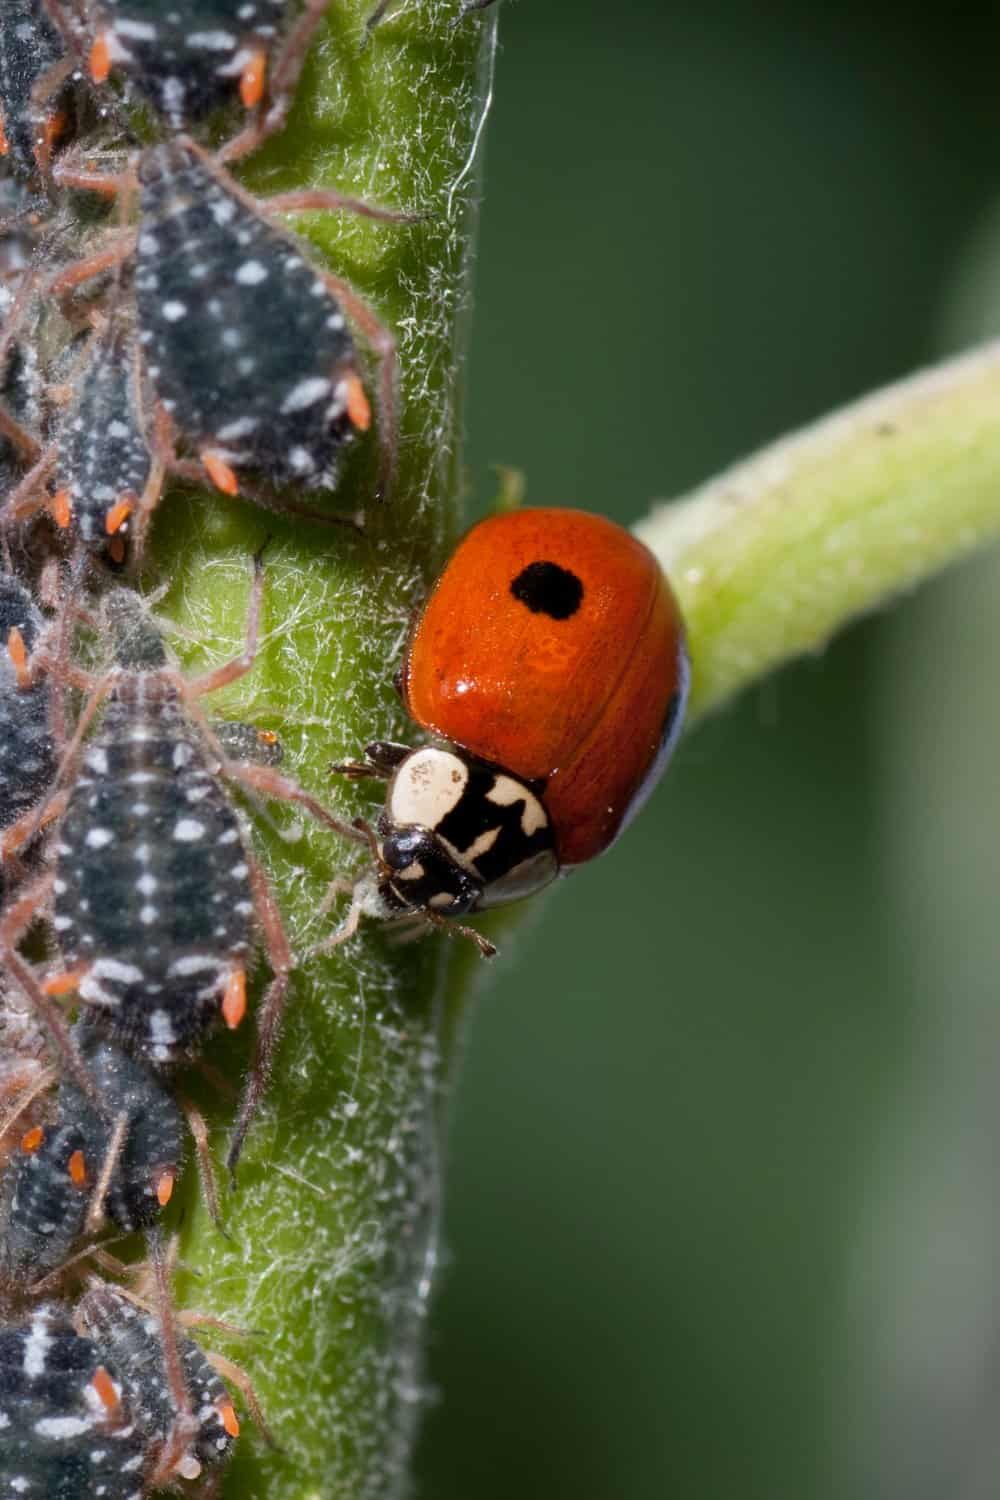 ladybug eating aphids on a plant